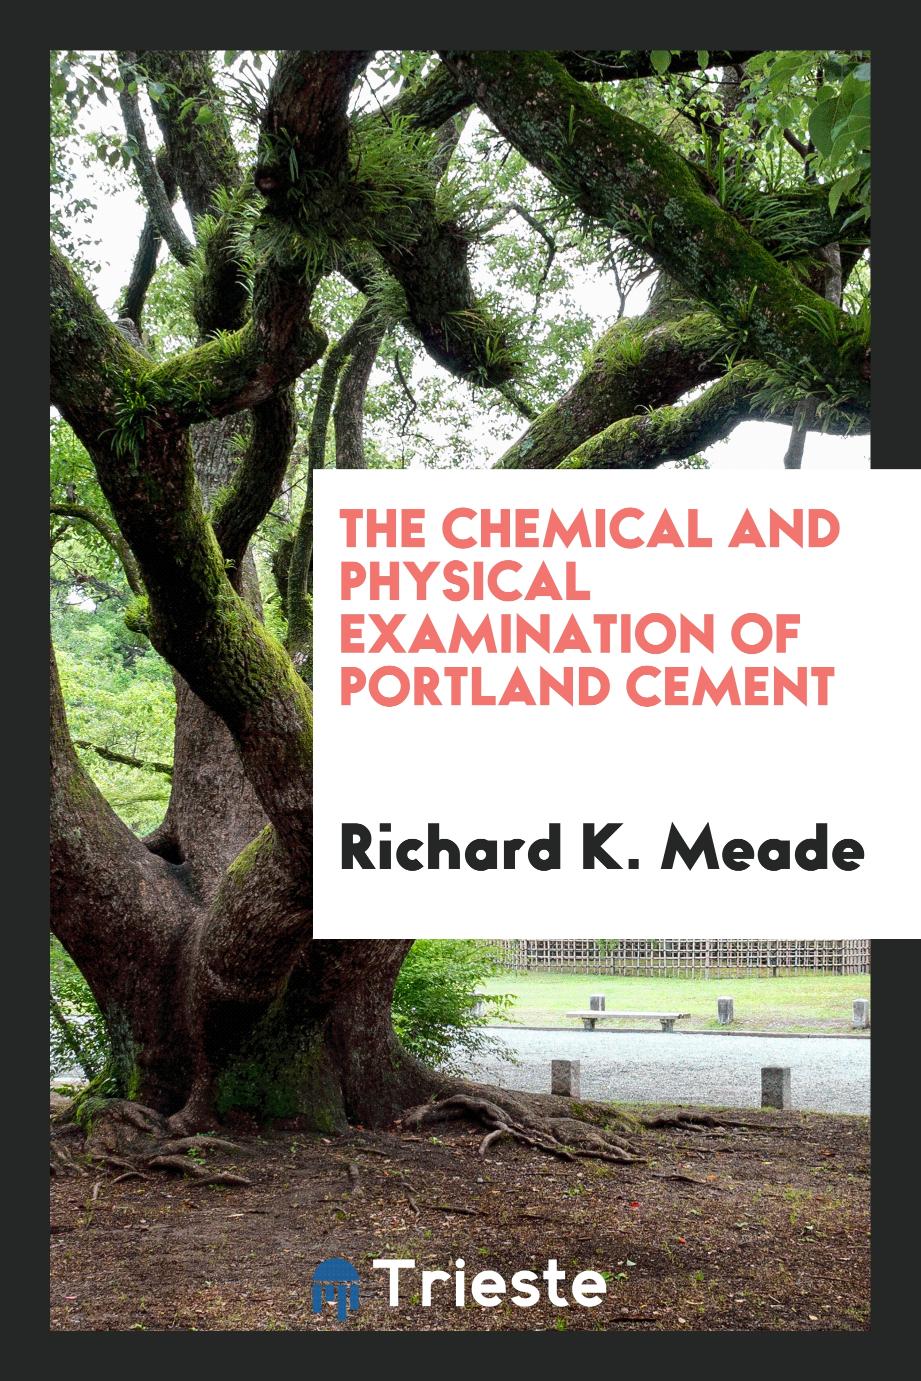 The chemical and physical examination of Portland cement